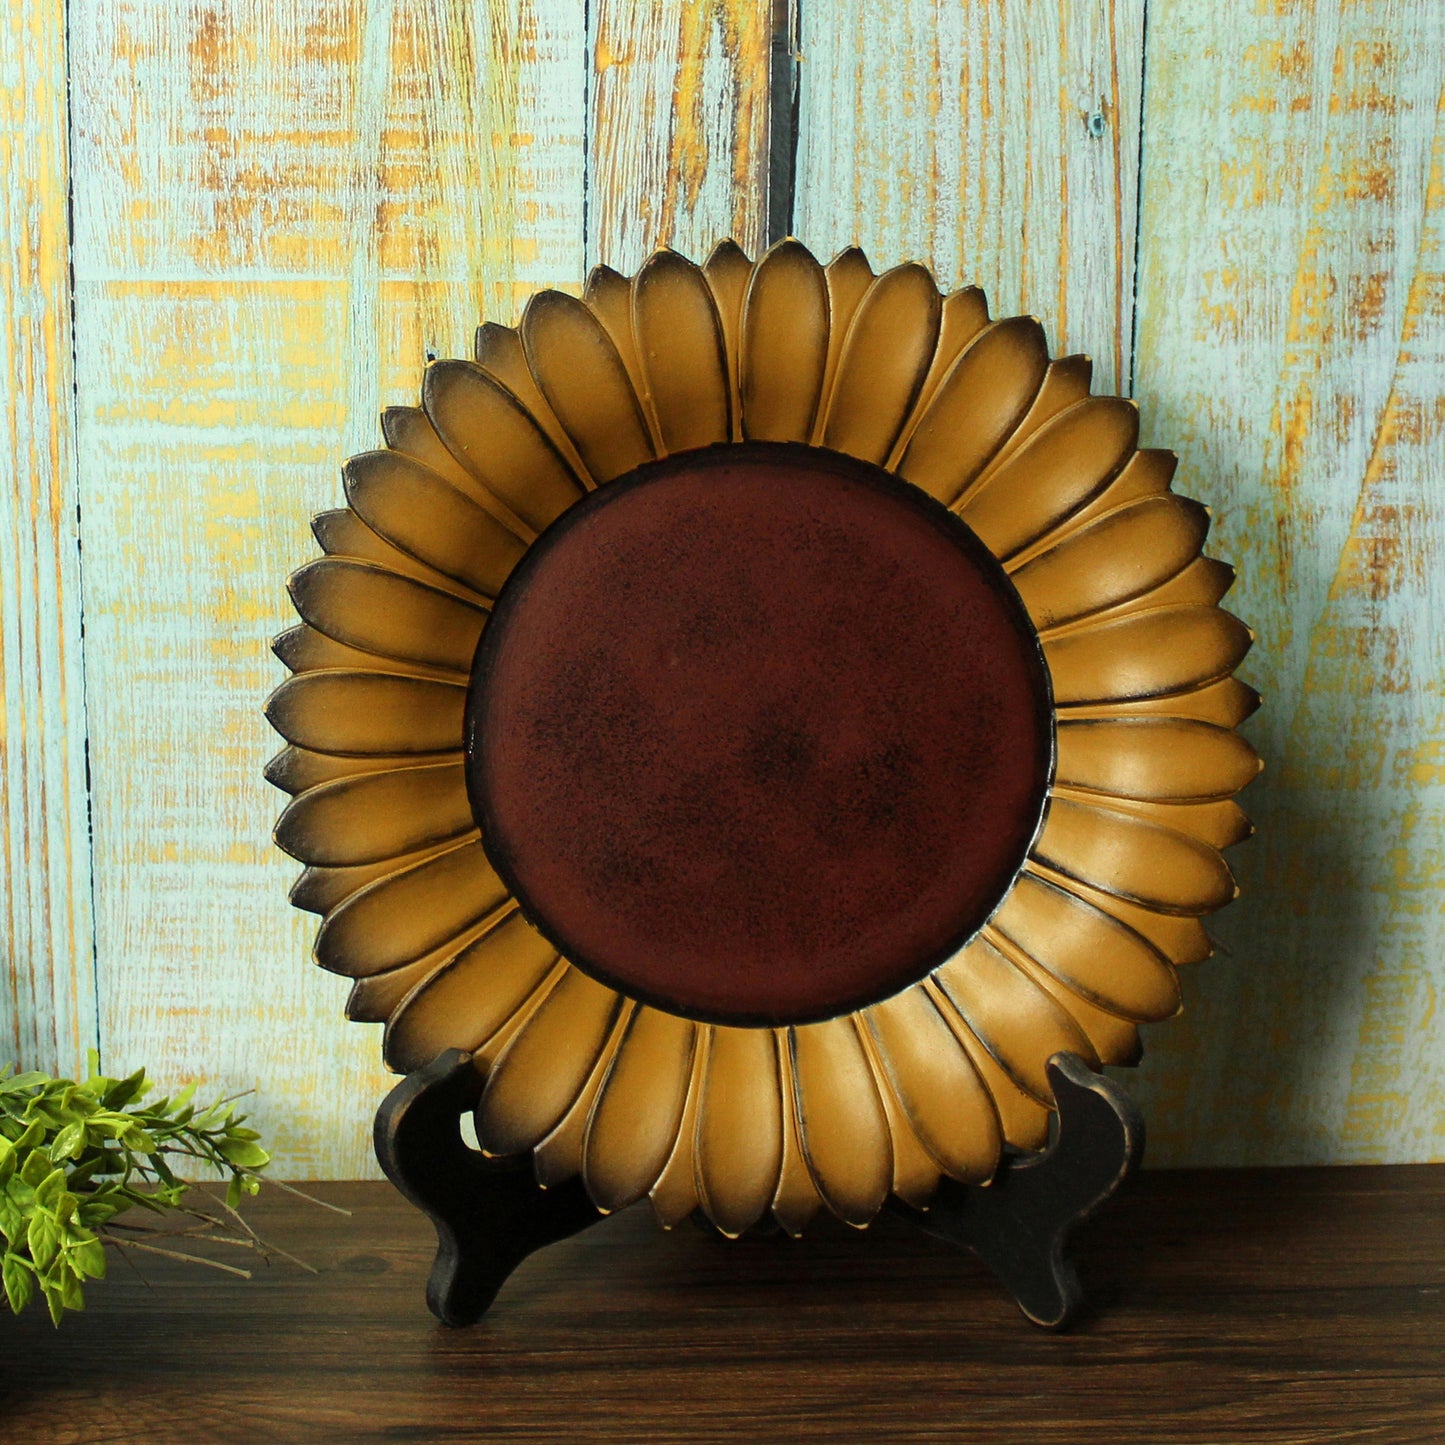 CVHOMEDECO. Sunflower Shape Plate Primitives Rustic Display Wooden Plate Home and Office Décor Art, 11 Inch